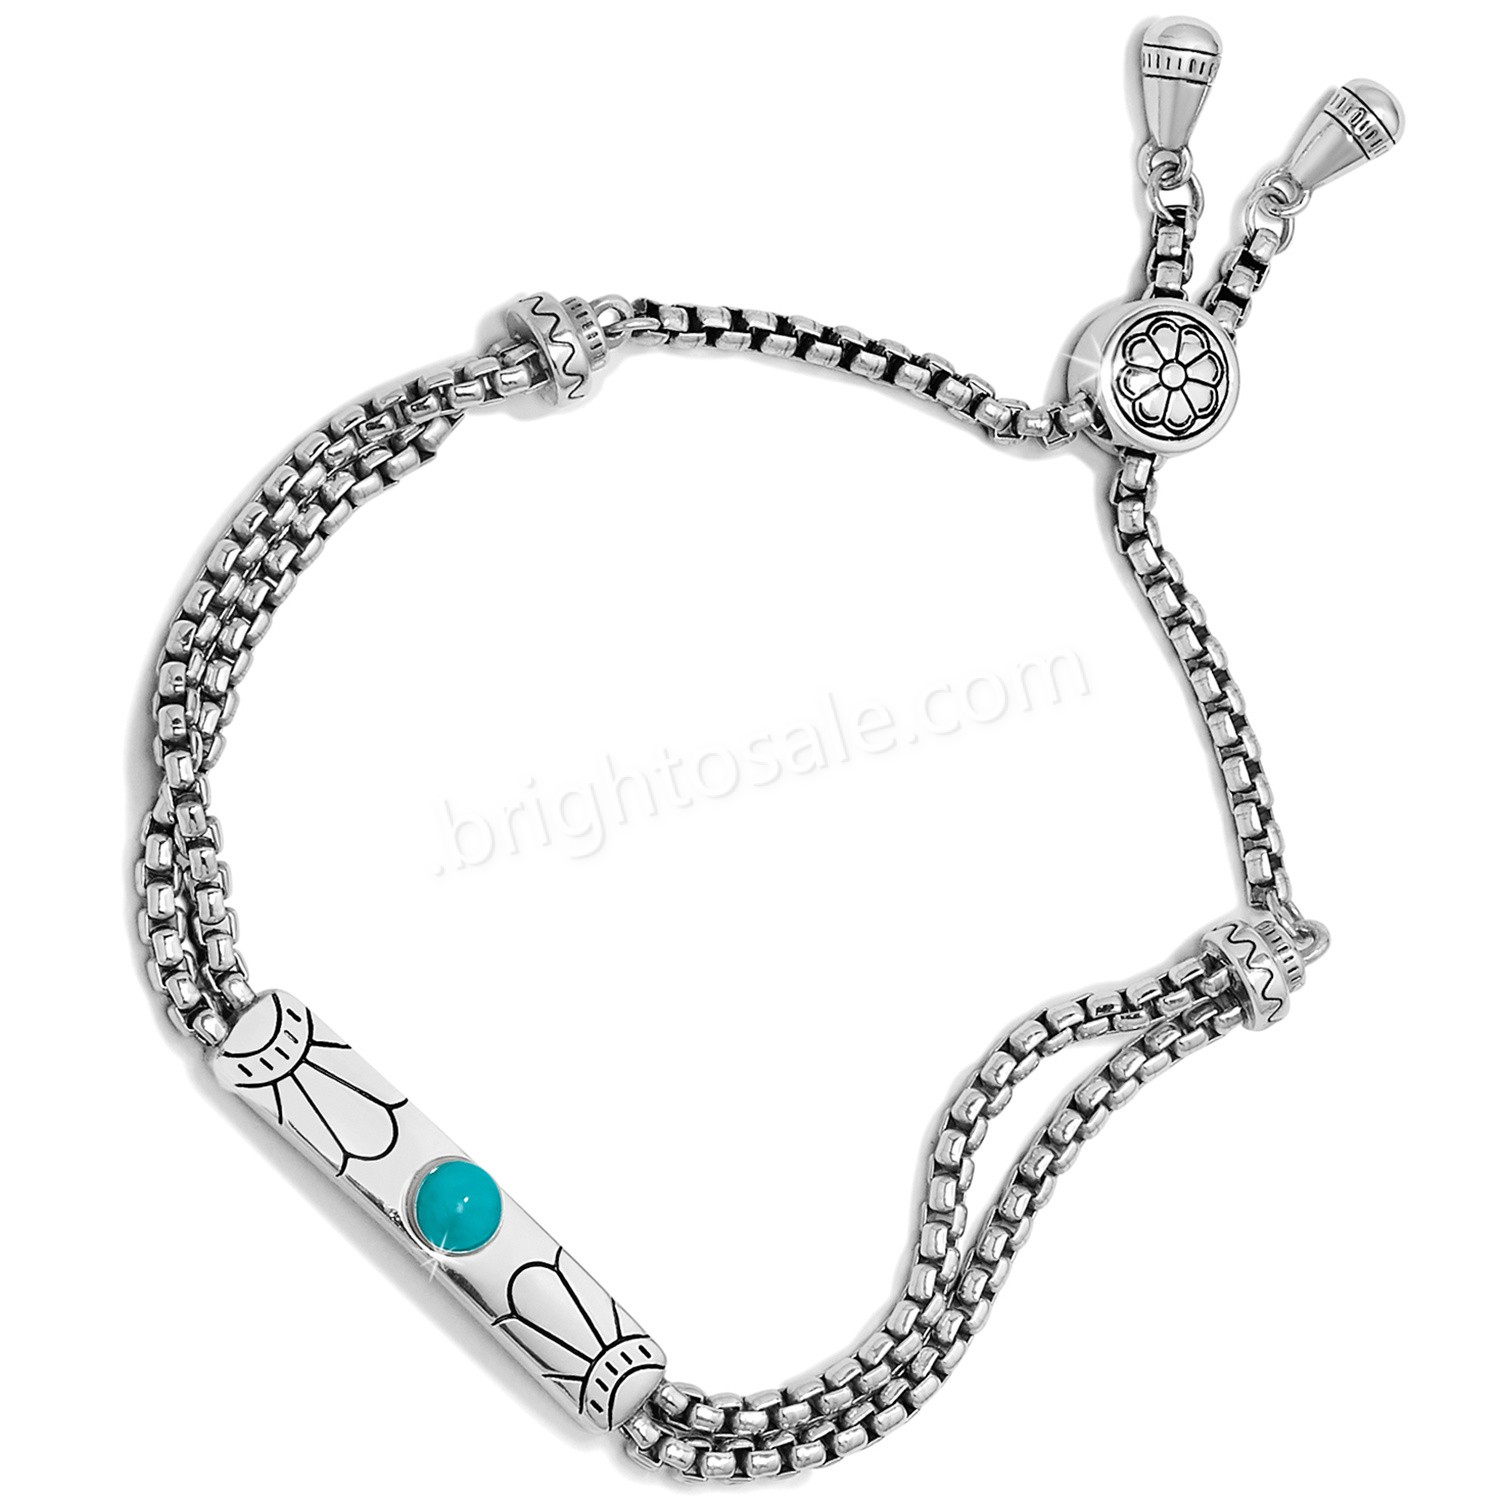 Brighton Collectibles & Online Discount Queen Of Waters Convertible Long Necklace - Brighton Collectibles & Online Discount Queen Of Waters Convertible Long Necklace